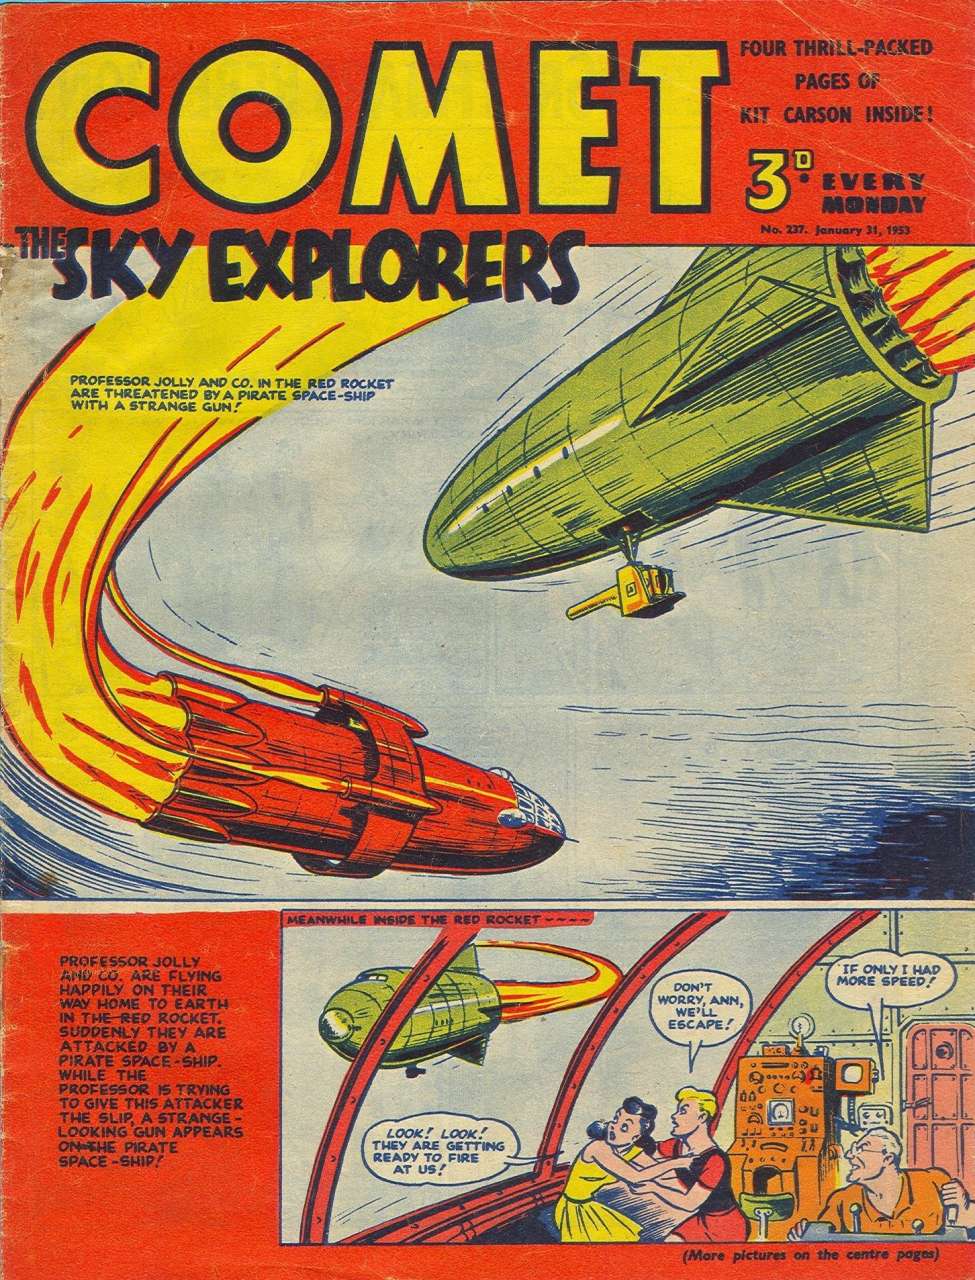 Comic Book Cover For The Comet 237